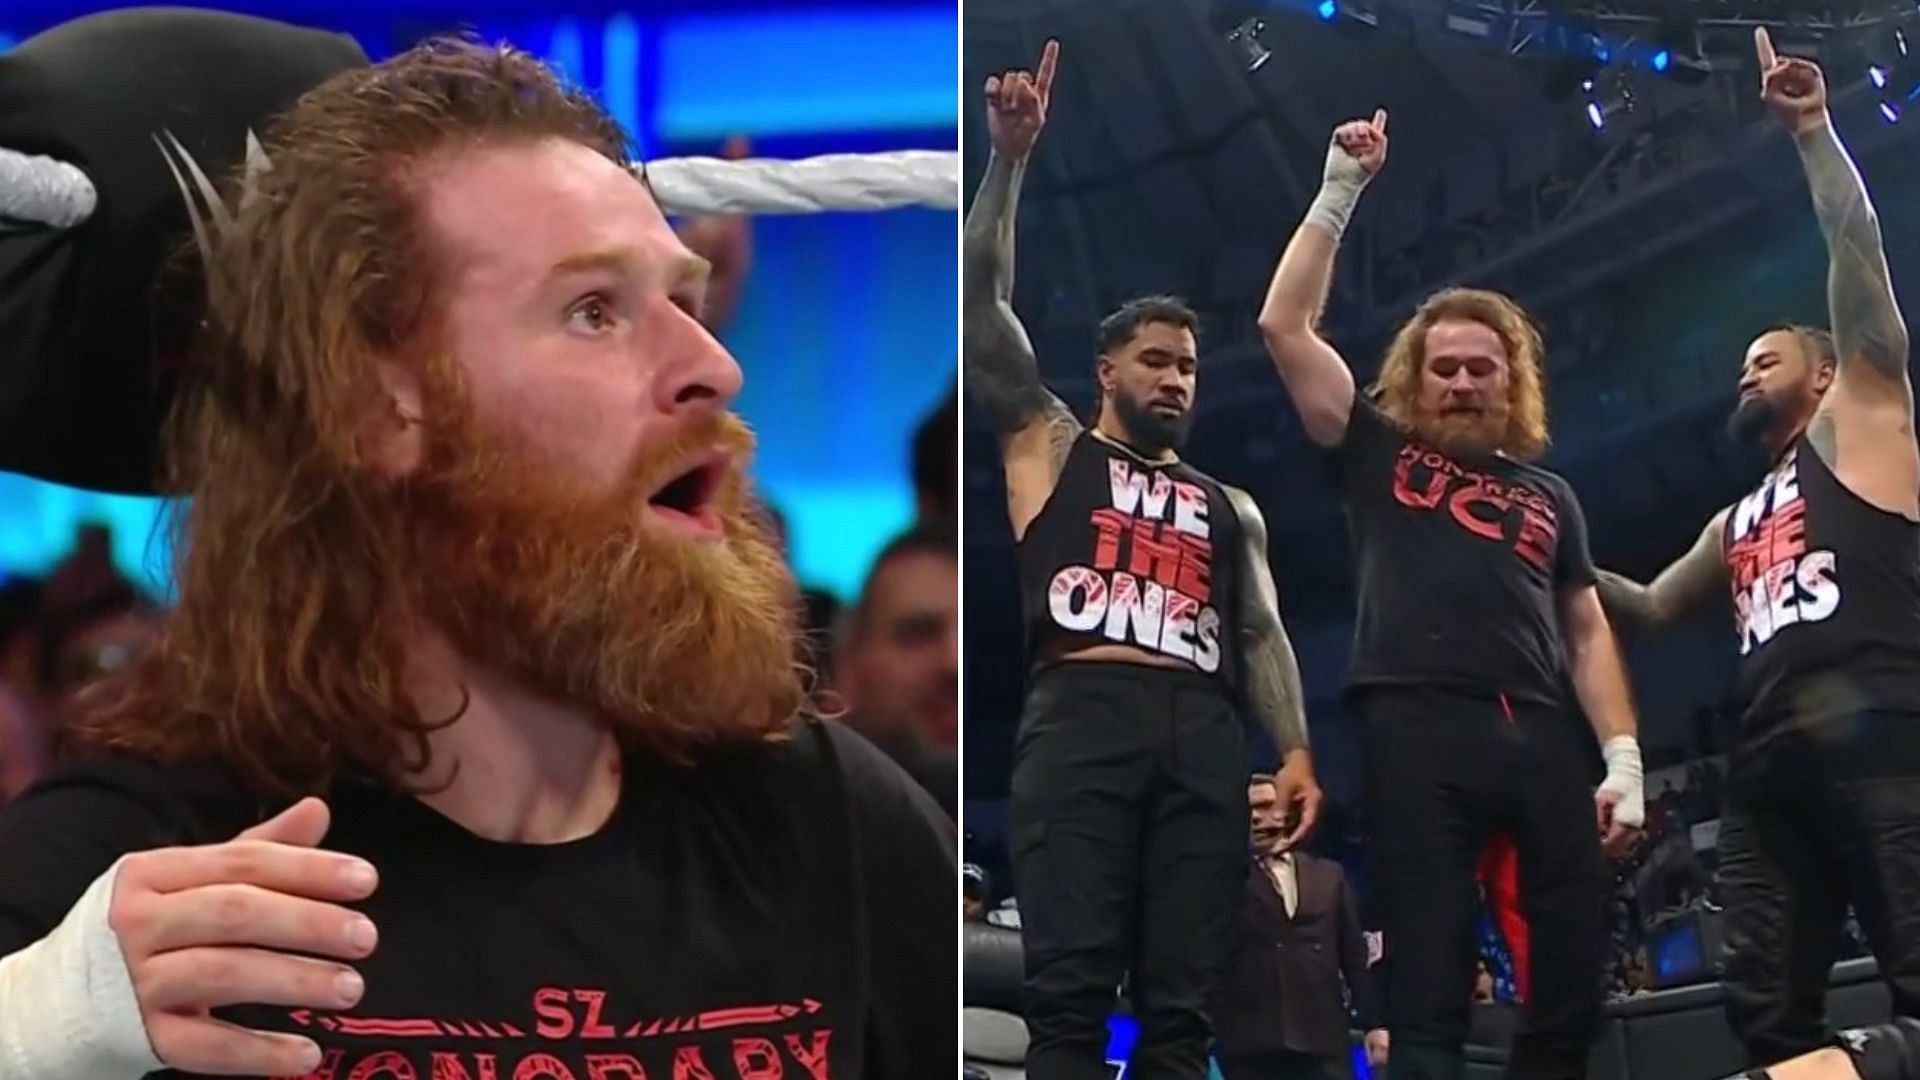 Sami Zayn and The Bloodline wreaked havoc on SmackDown